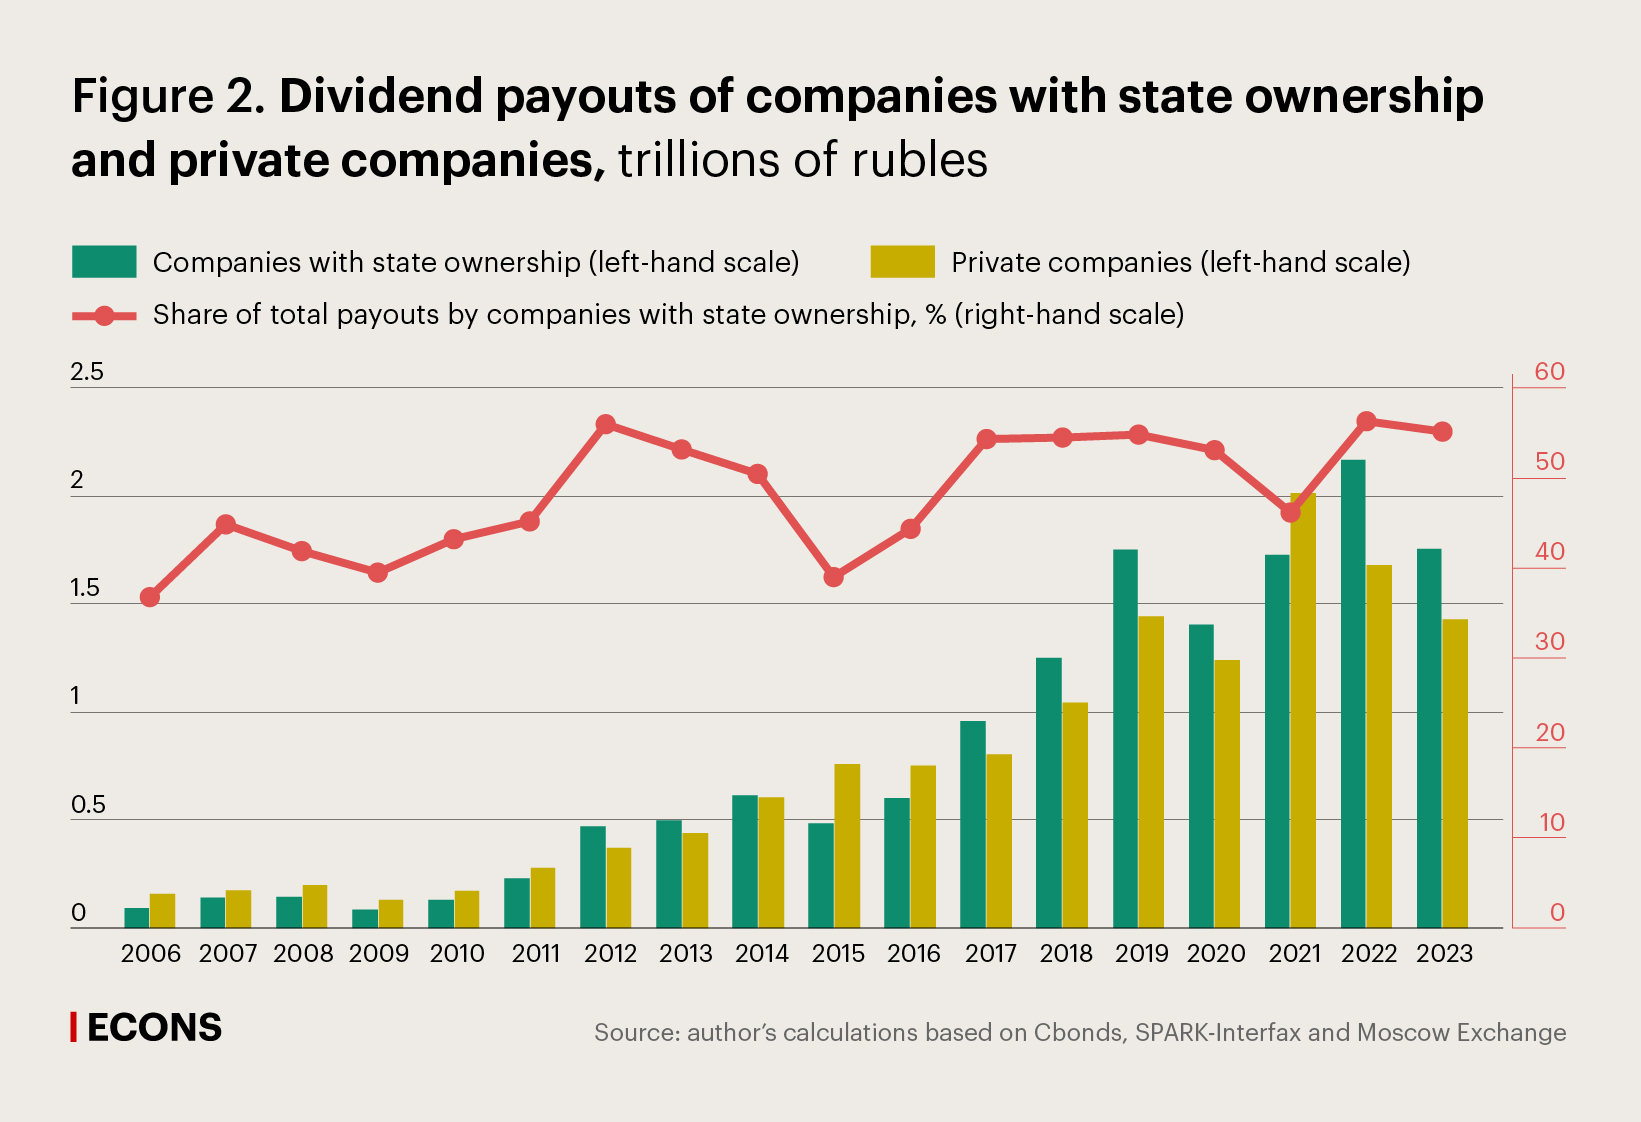 Dividend payouts of companies with state ownership and private companies, trillions of rubles